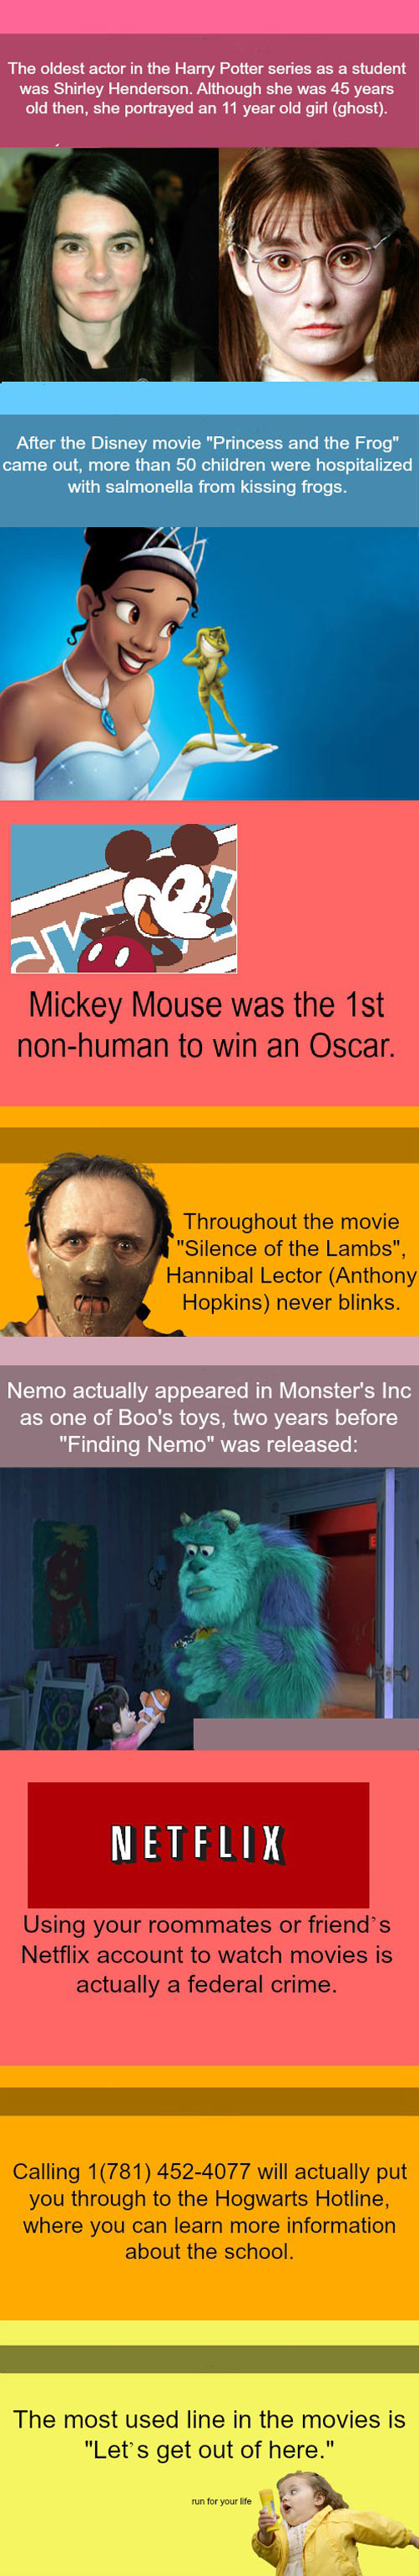 Some useless movie facts…